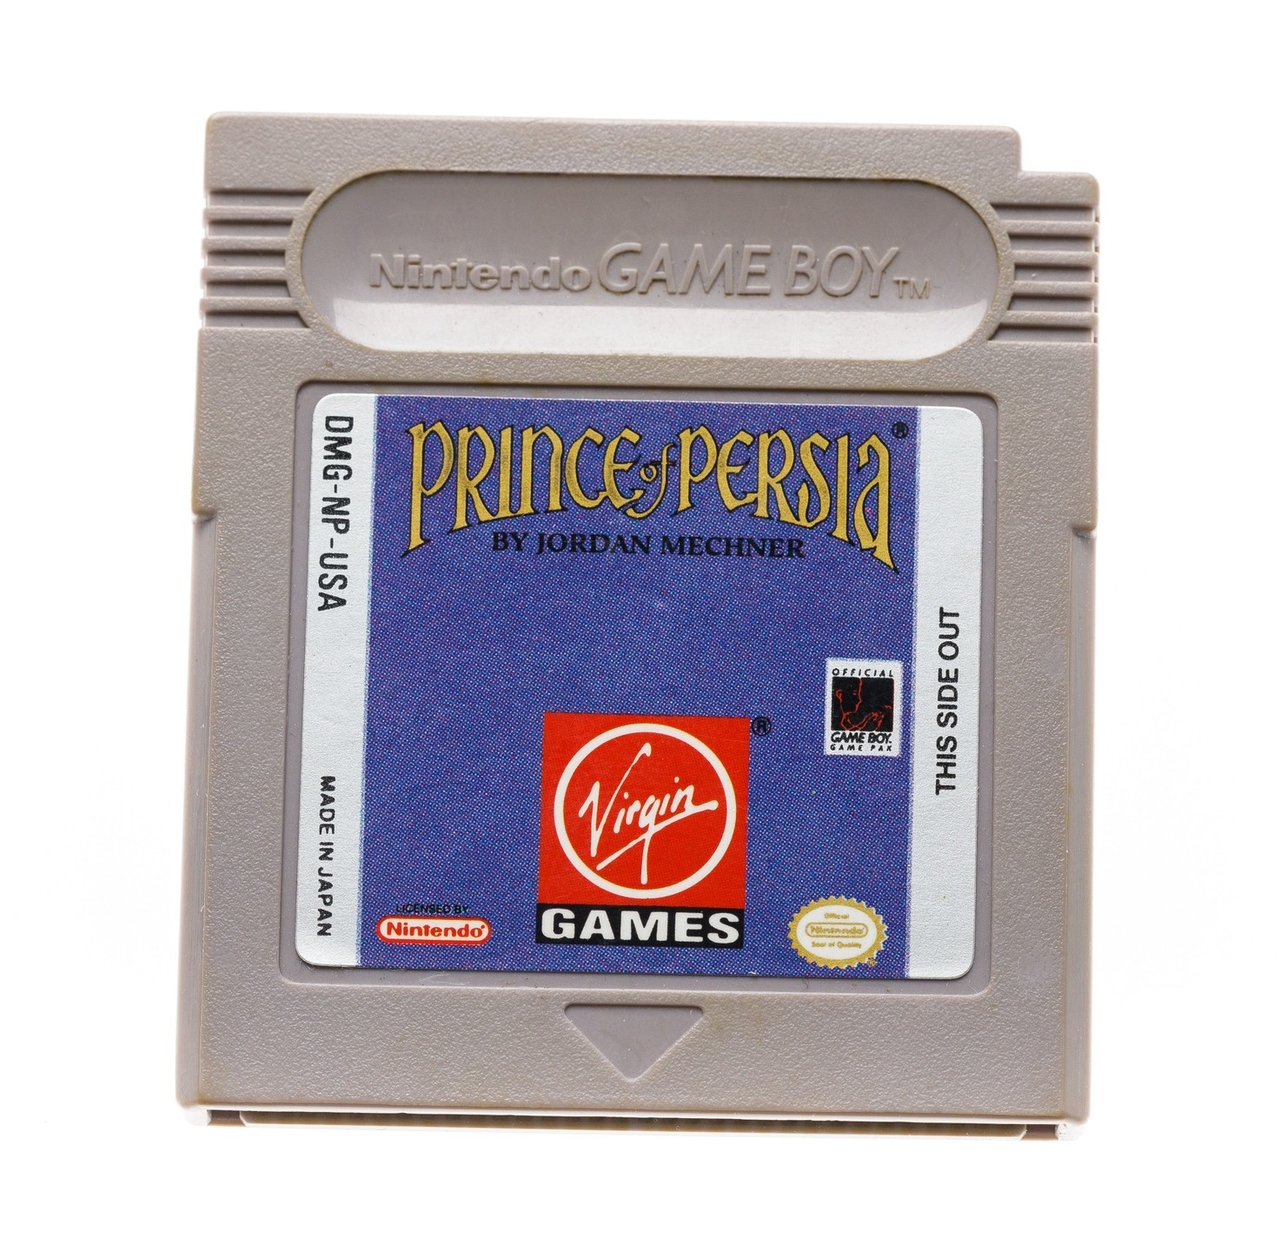 Prince of Persia - Gameboy Classic Games